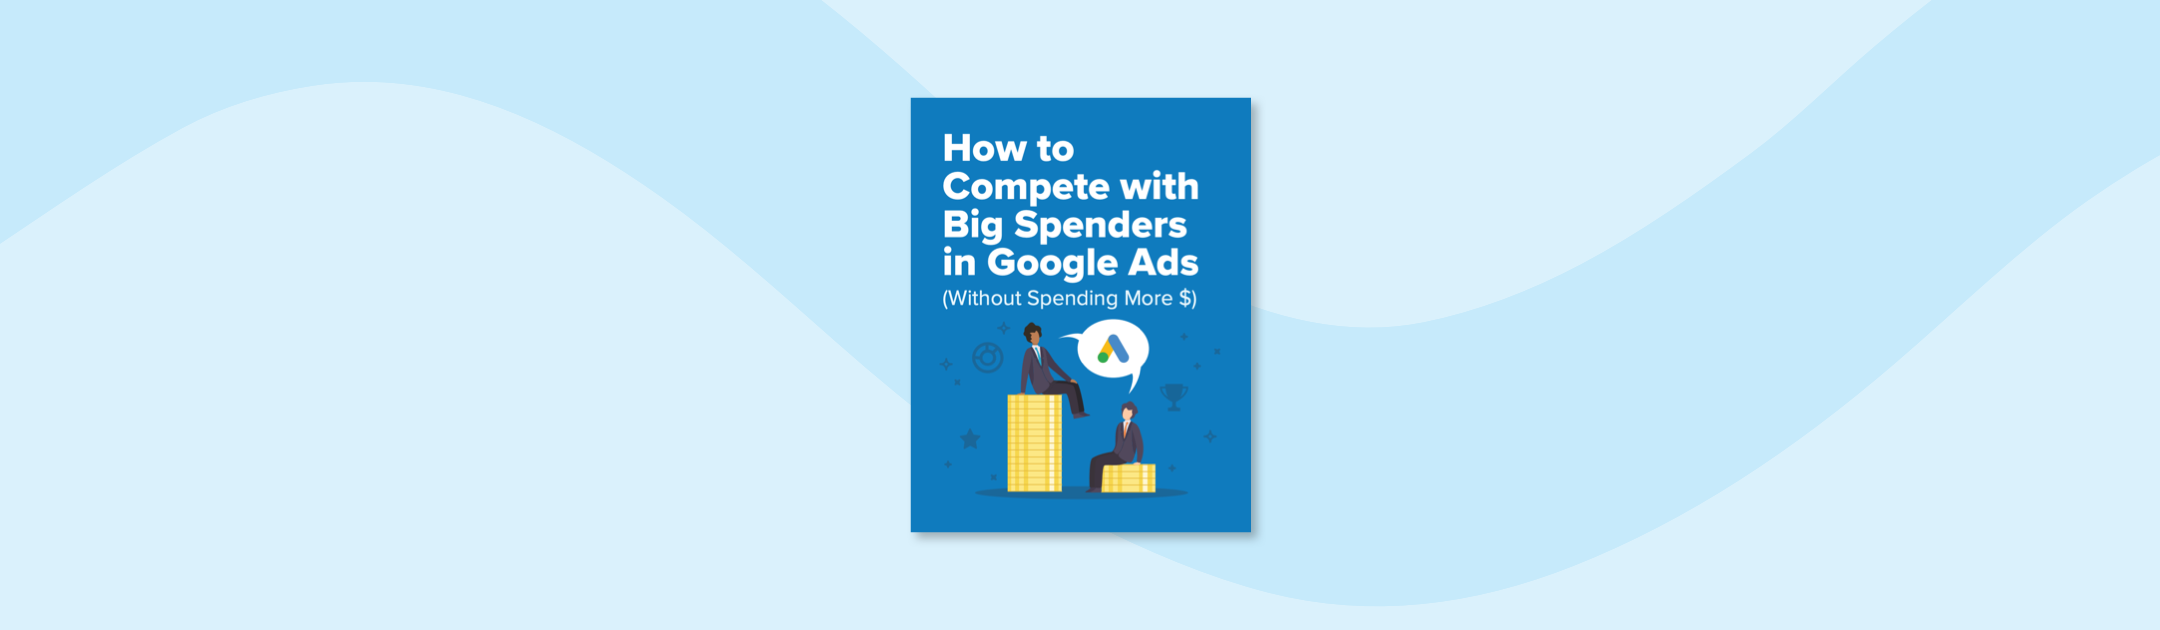 How to Compete With Big Spenders in Google Ads (Without Spending More $$)